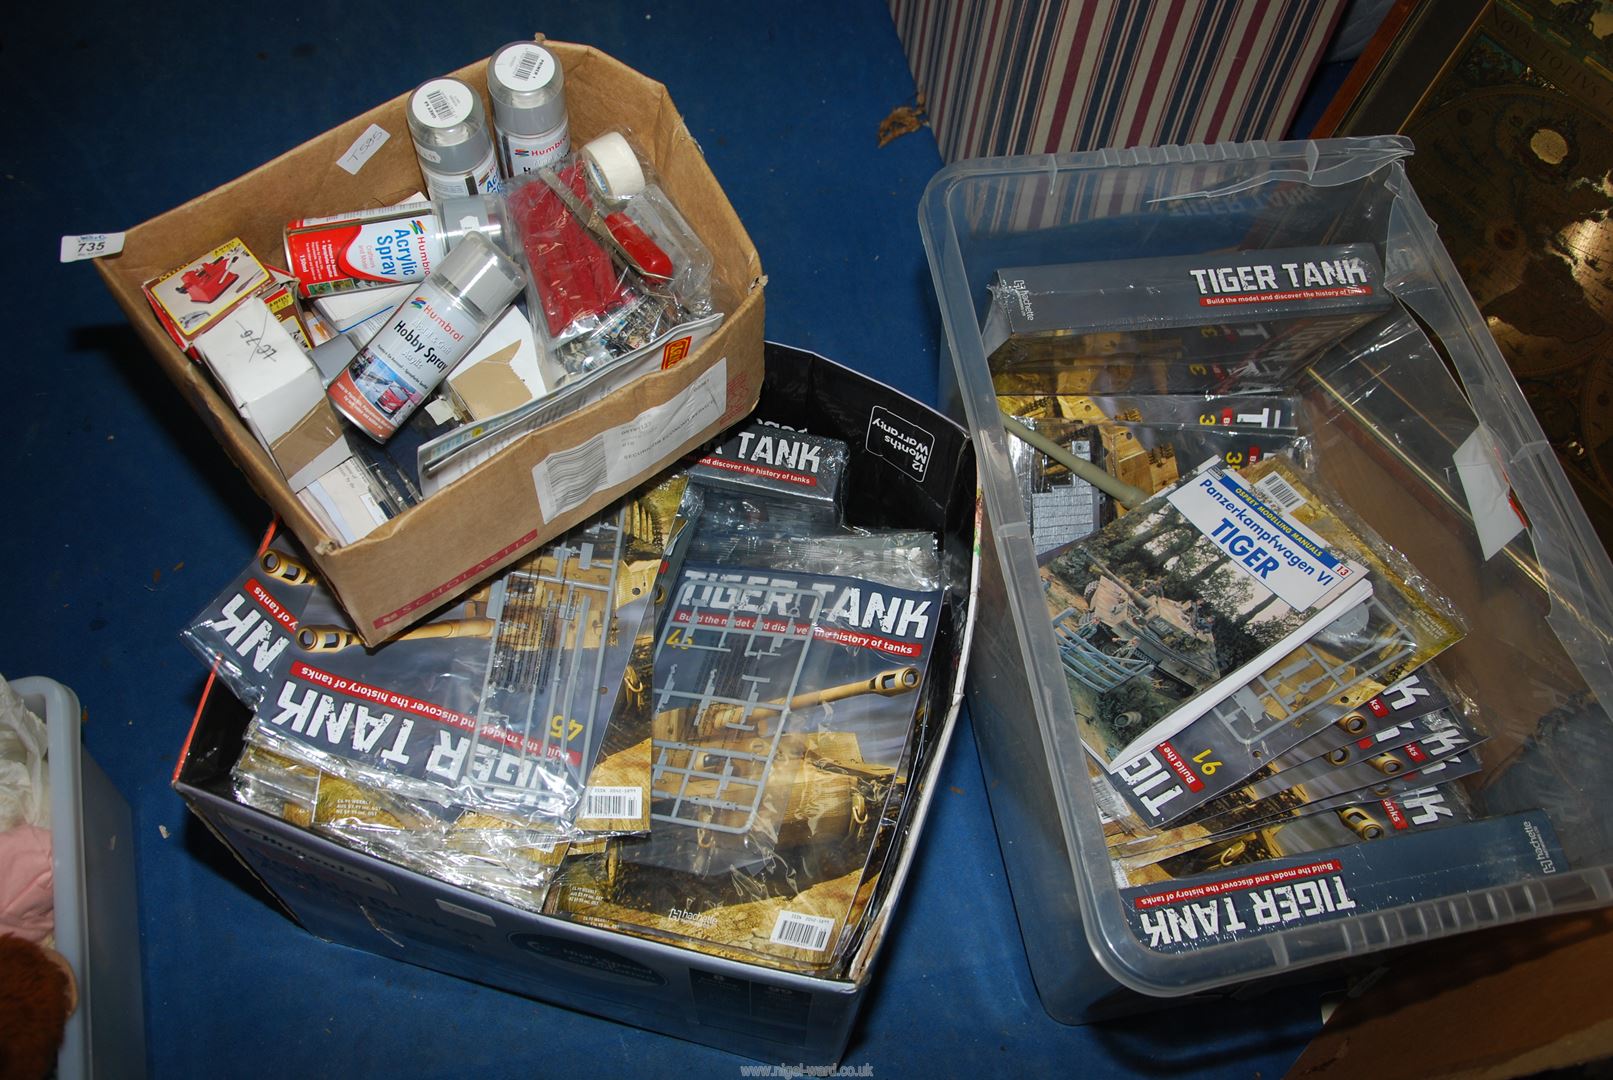 A quantity of 'Tiger Tank' magazines and model kits etc.